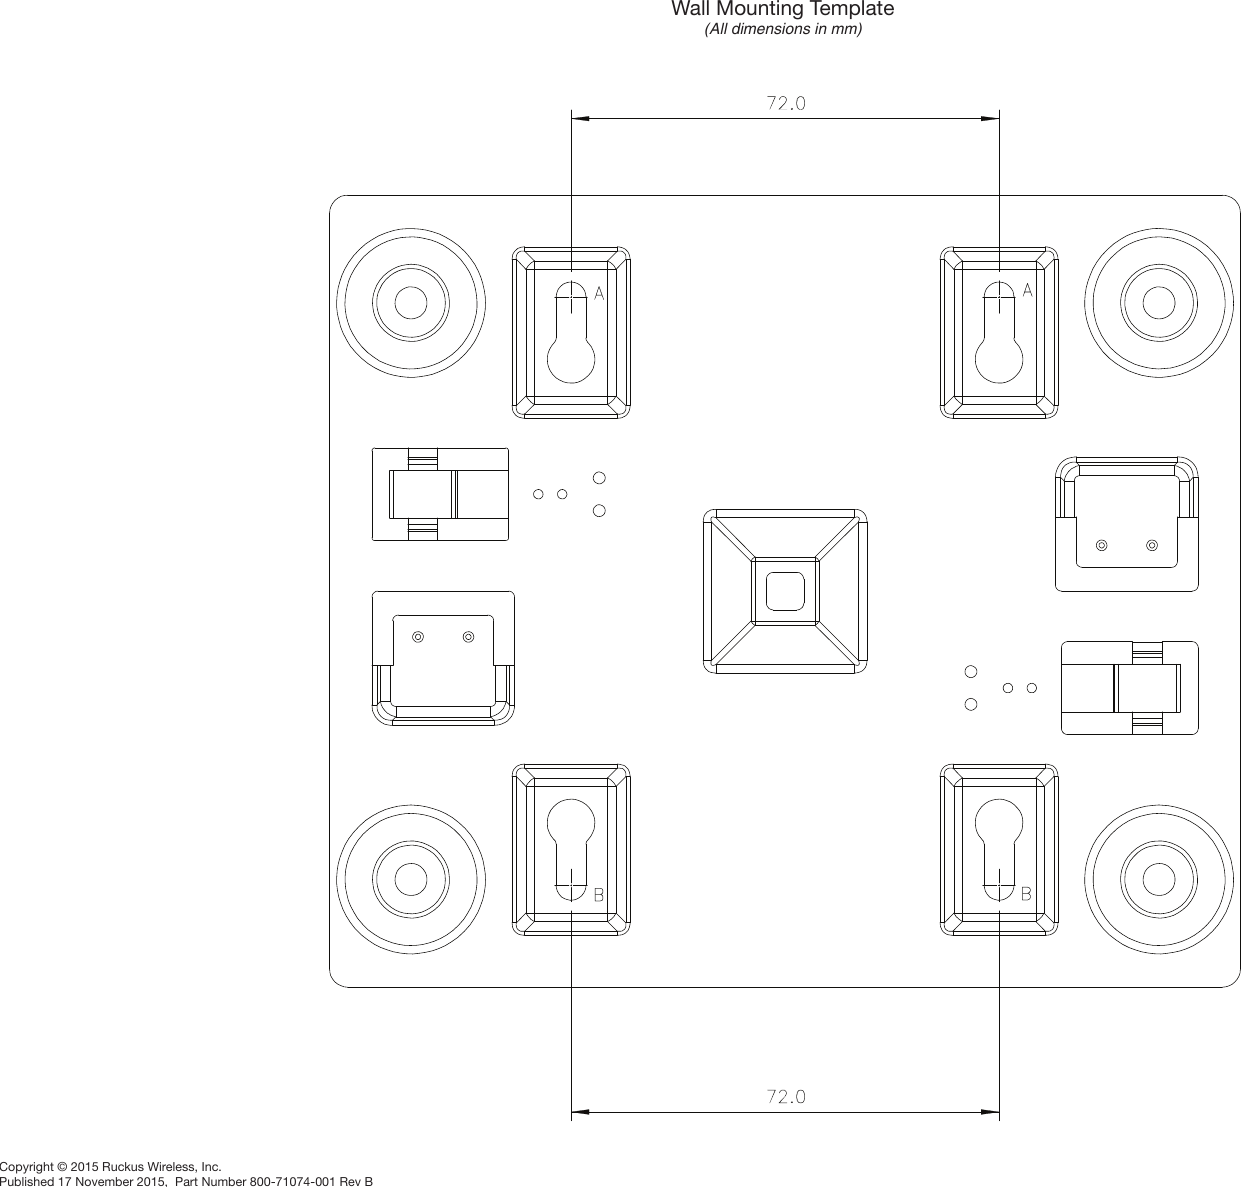 Wall Mounting Template(All dimensions in mm)Copyright © 2015 Ruckus Wireless, Inc.Published 17 November 2015,  Part Number 800-71074-001 Rev B